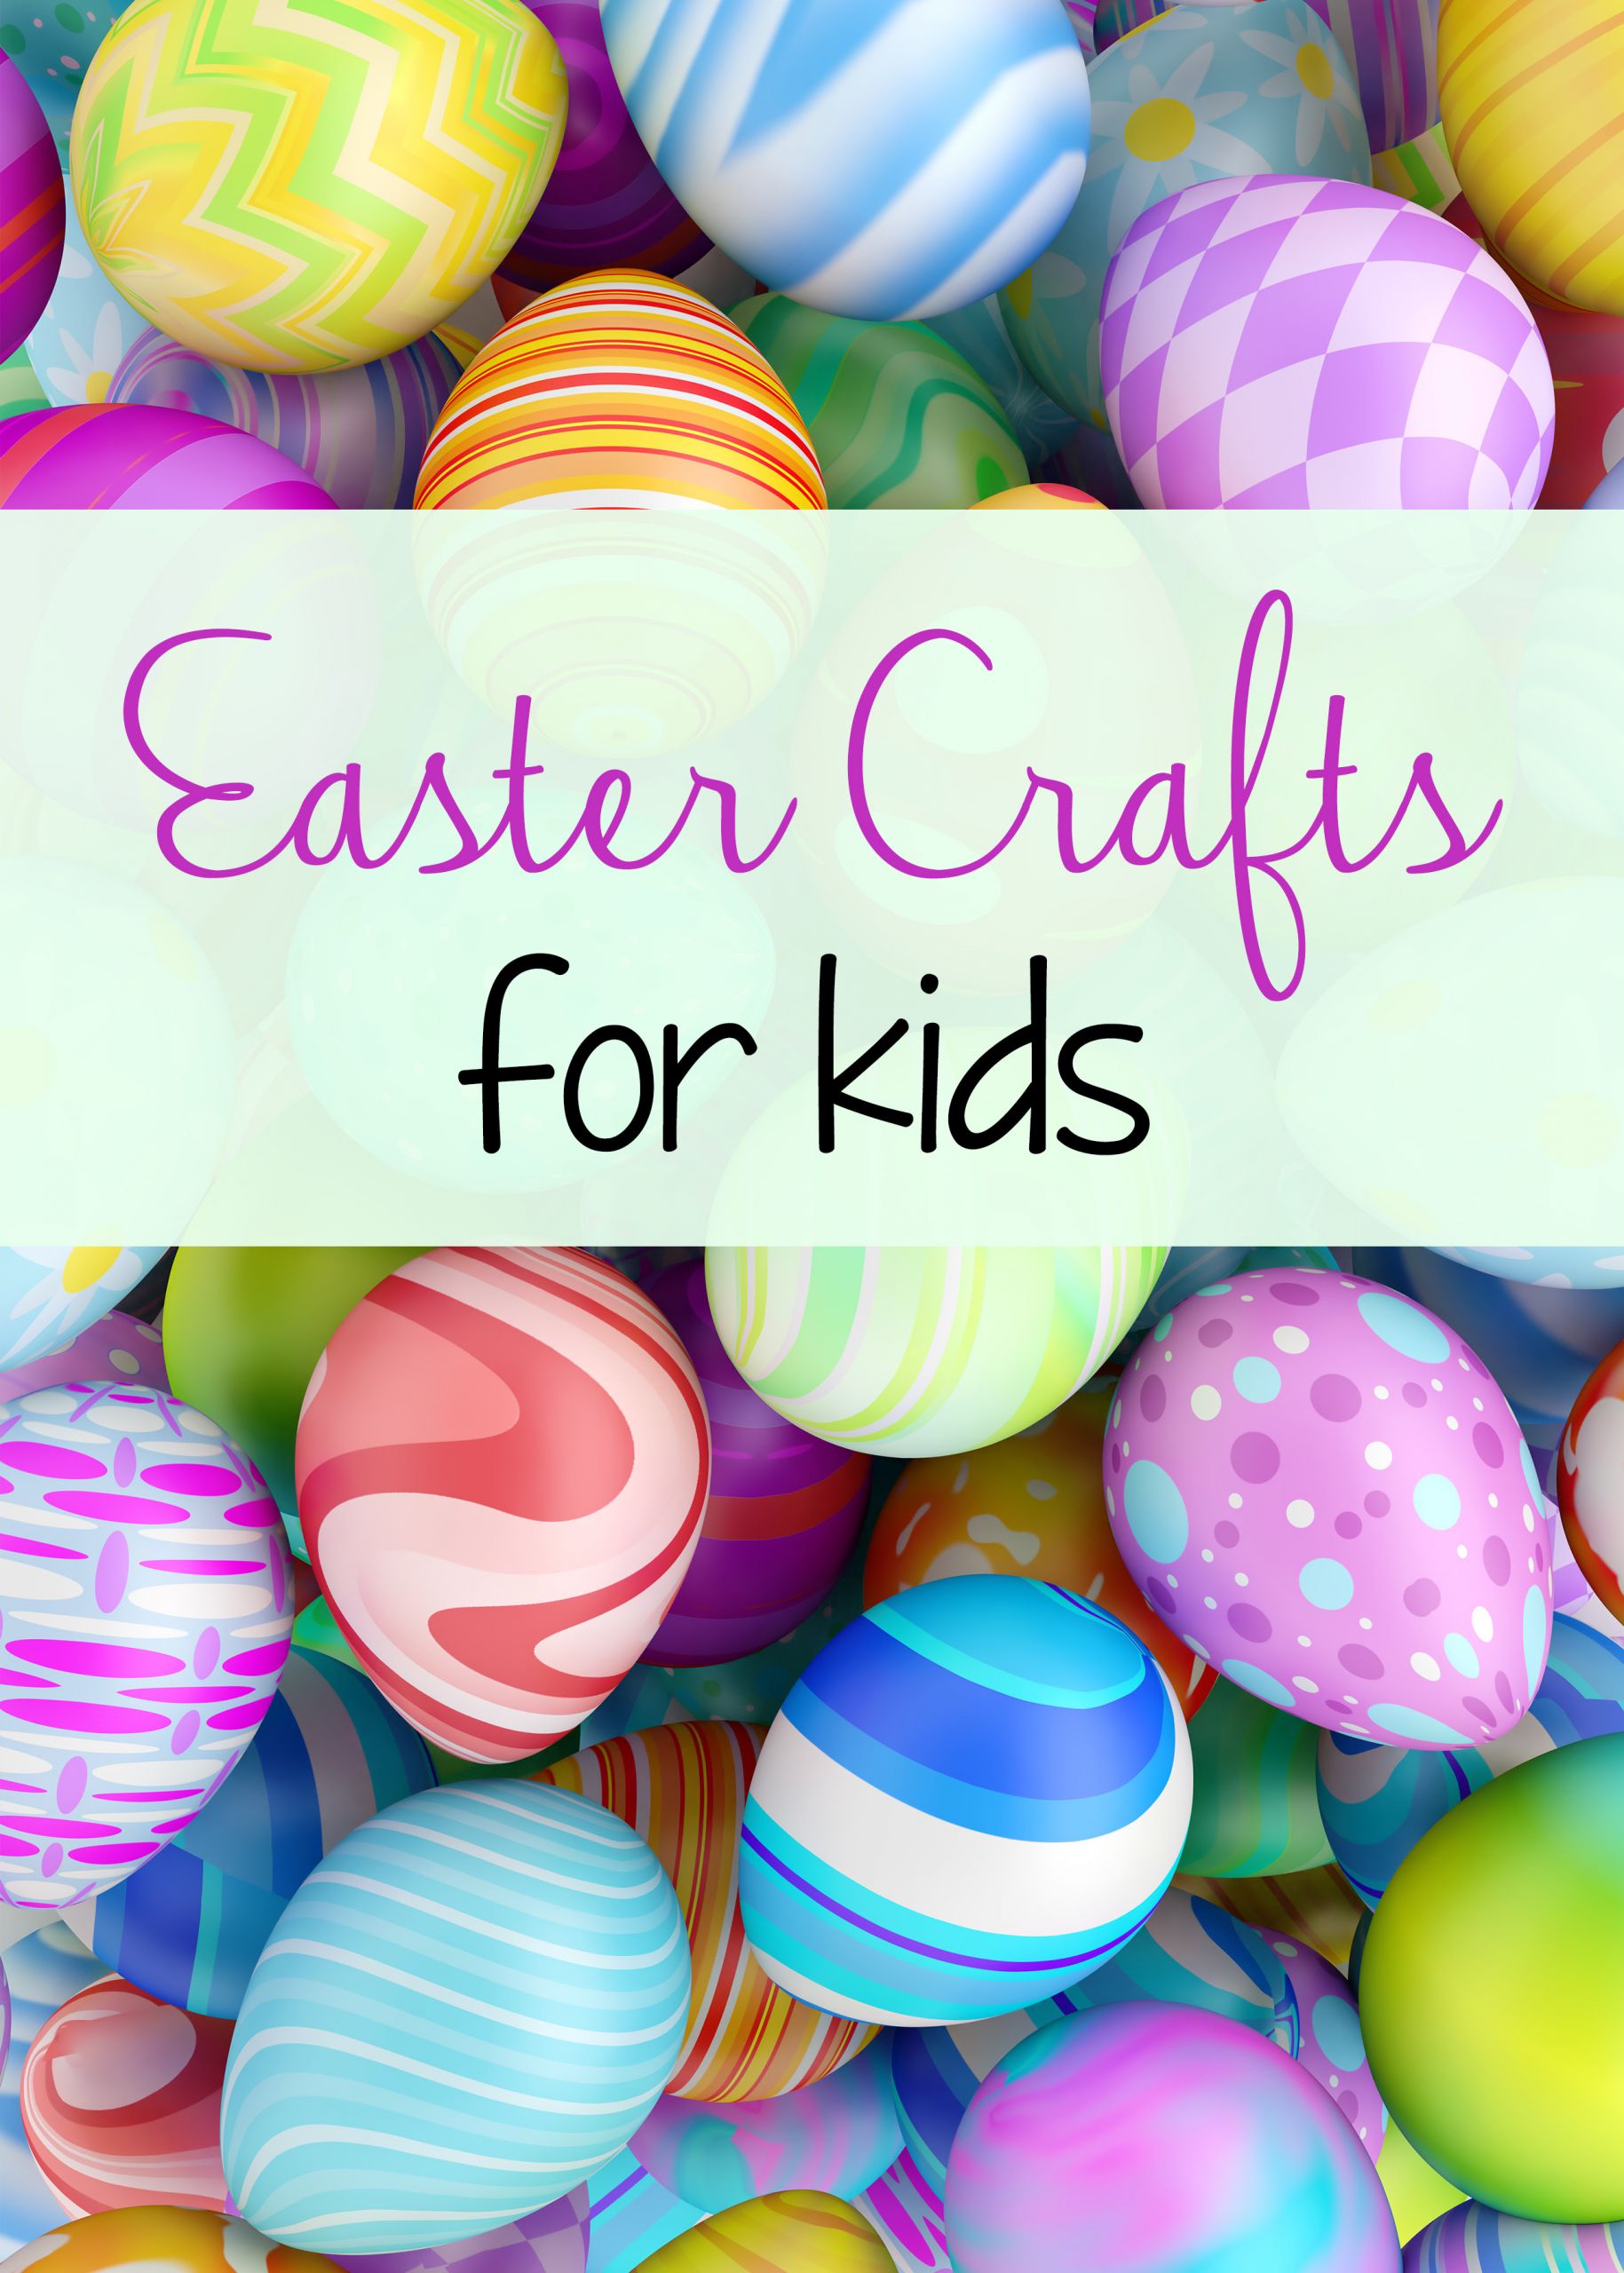 Fun Easter Crafts
 Top Easter Crafts For Kids The Relaxed Homeschool